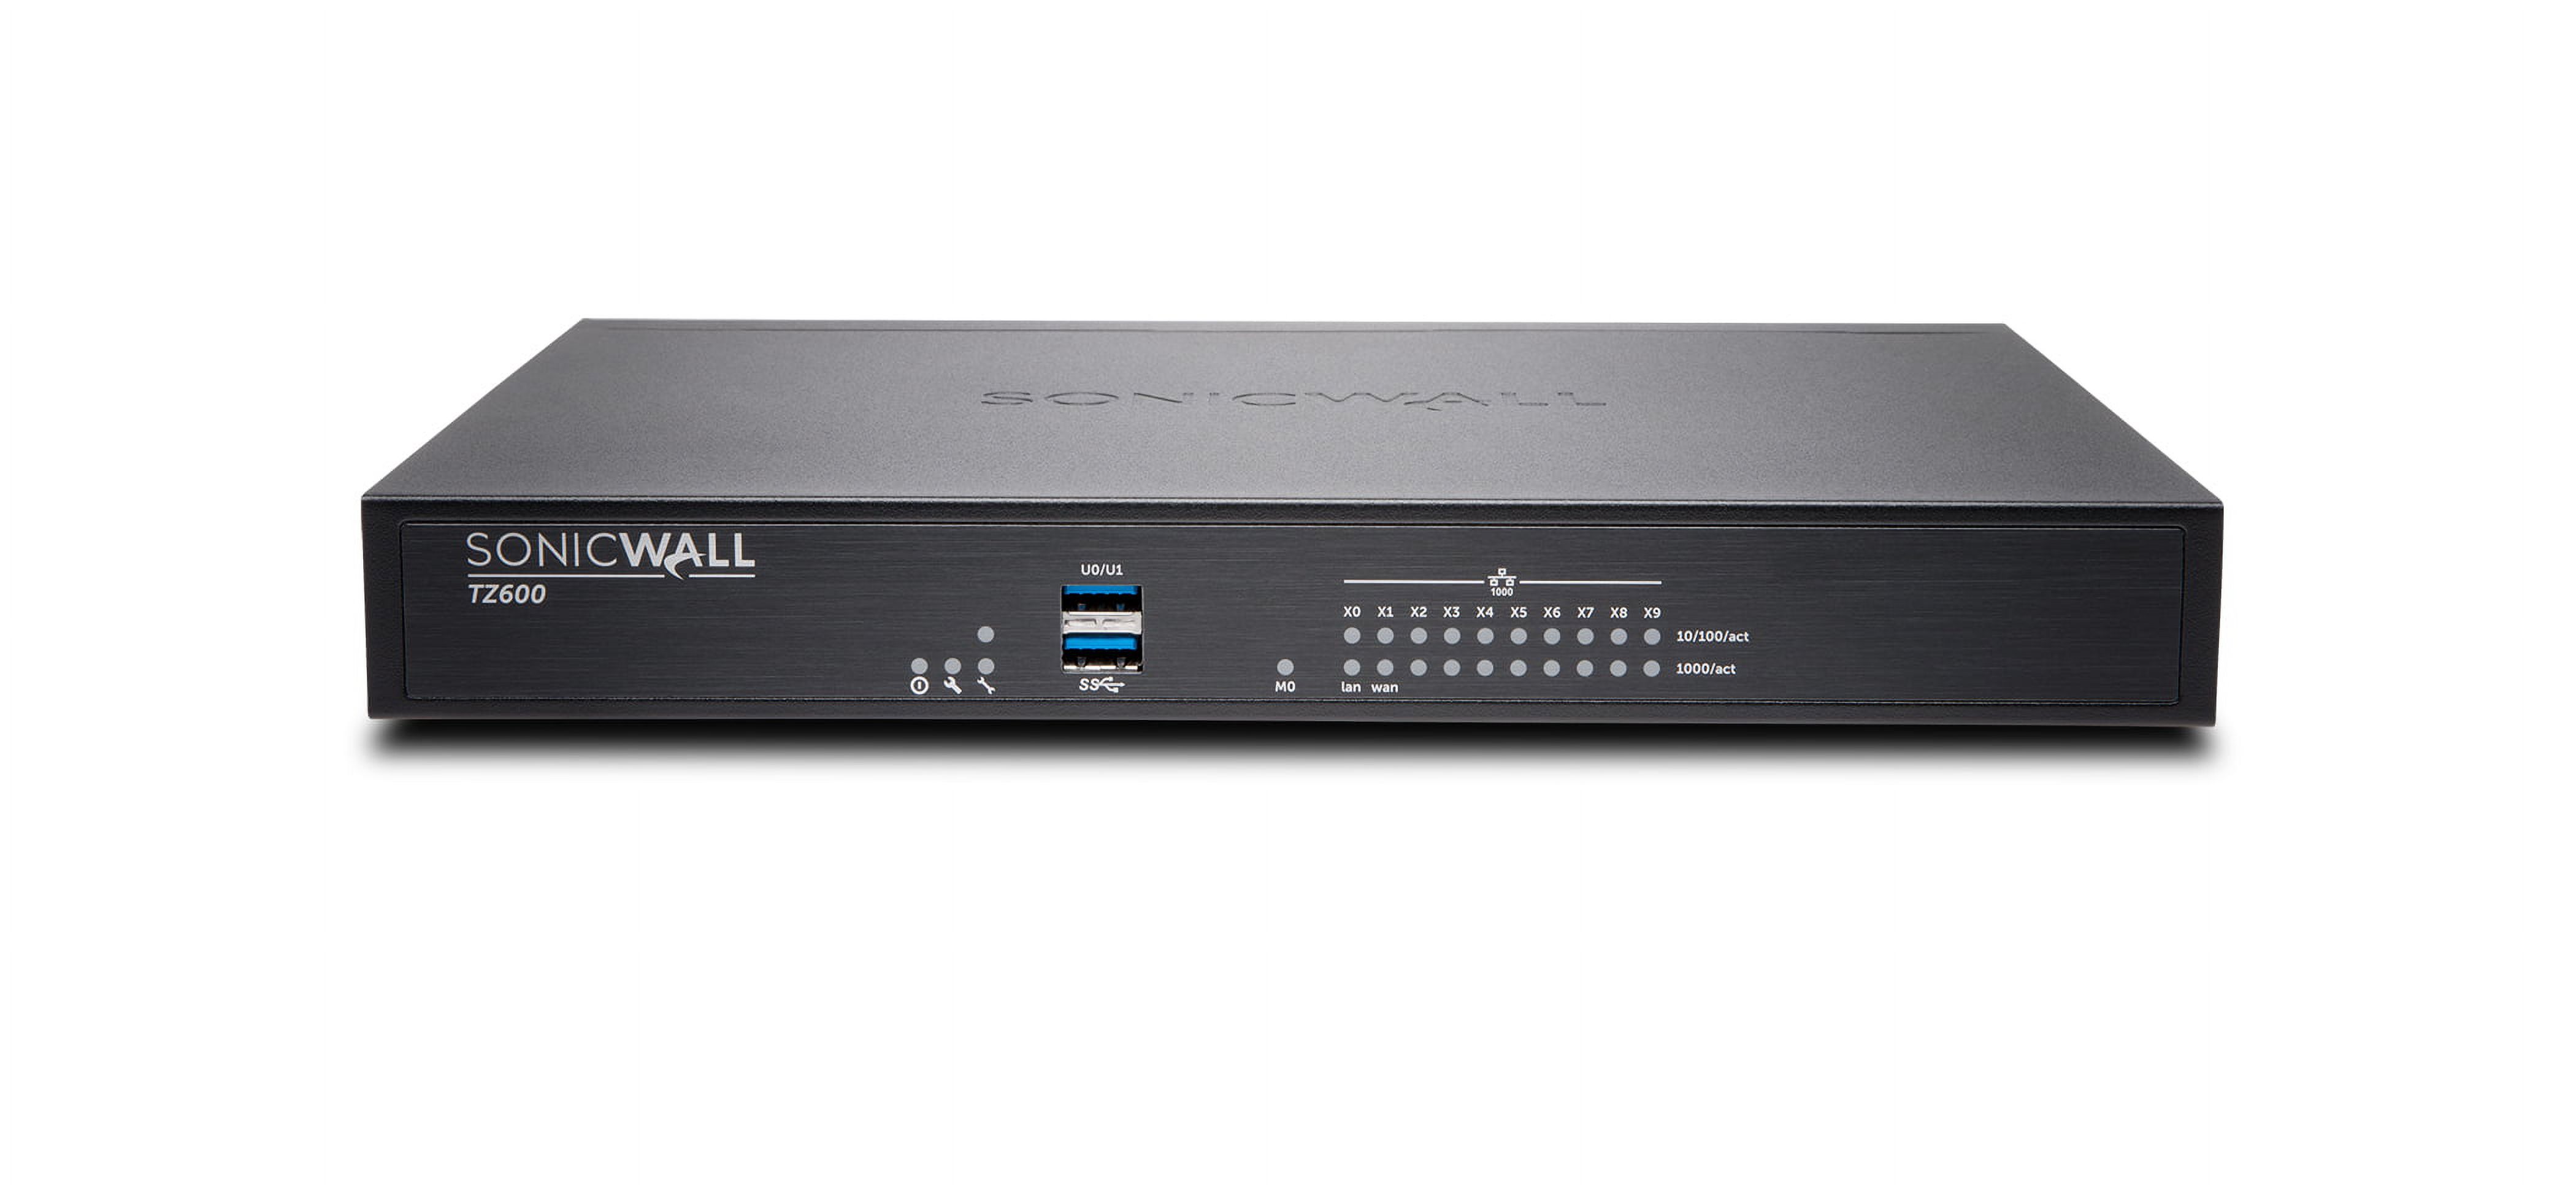 SonicWall TZ600 High Availability 01-SSC-0220 - image 1 of 3